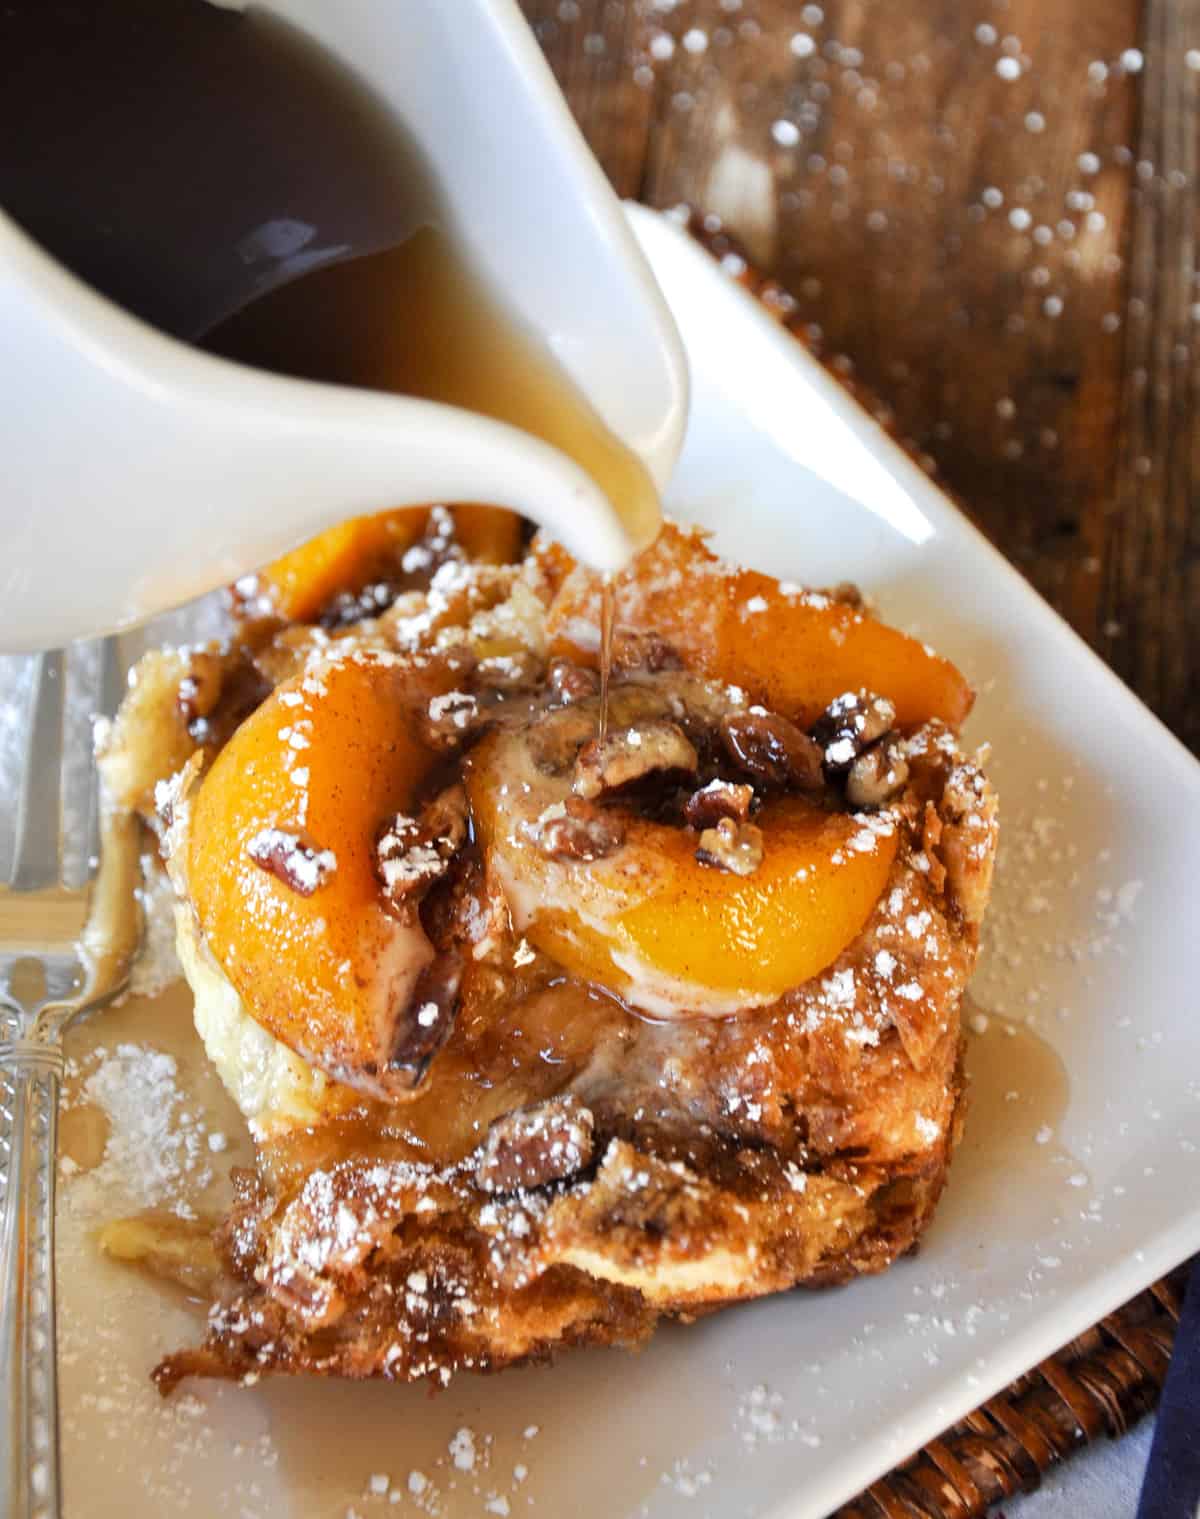 Maple Syrup poured over Peaches and Cream Overnight French Toast